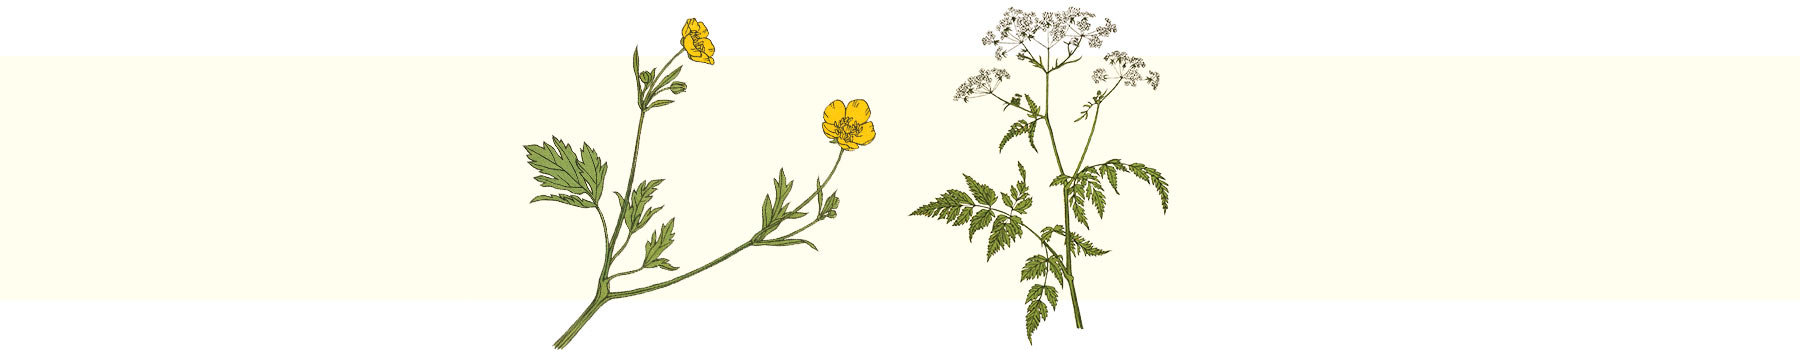 drawings of yellow buttercups and white yarrow